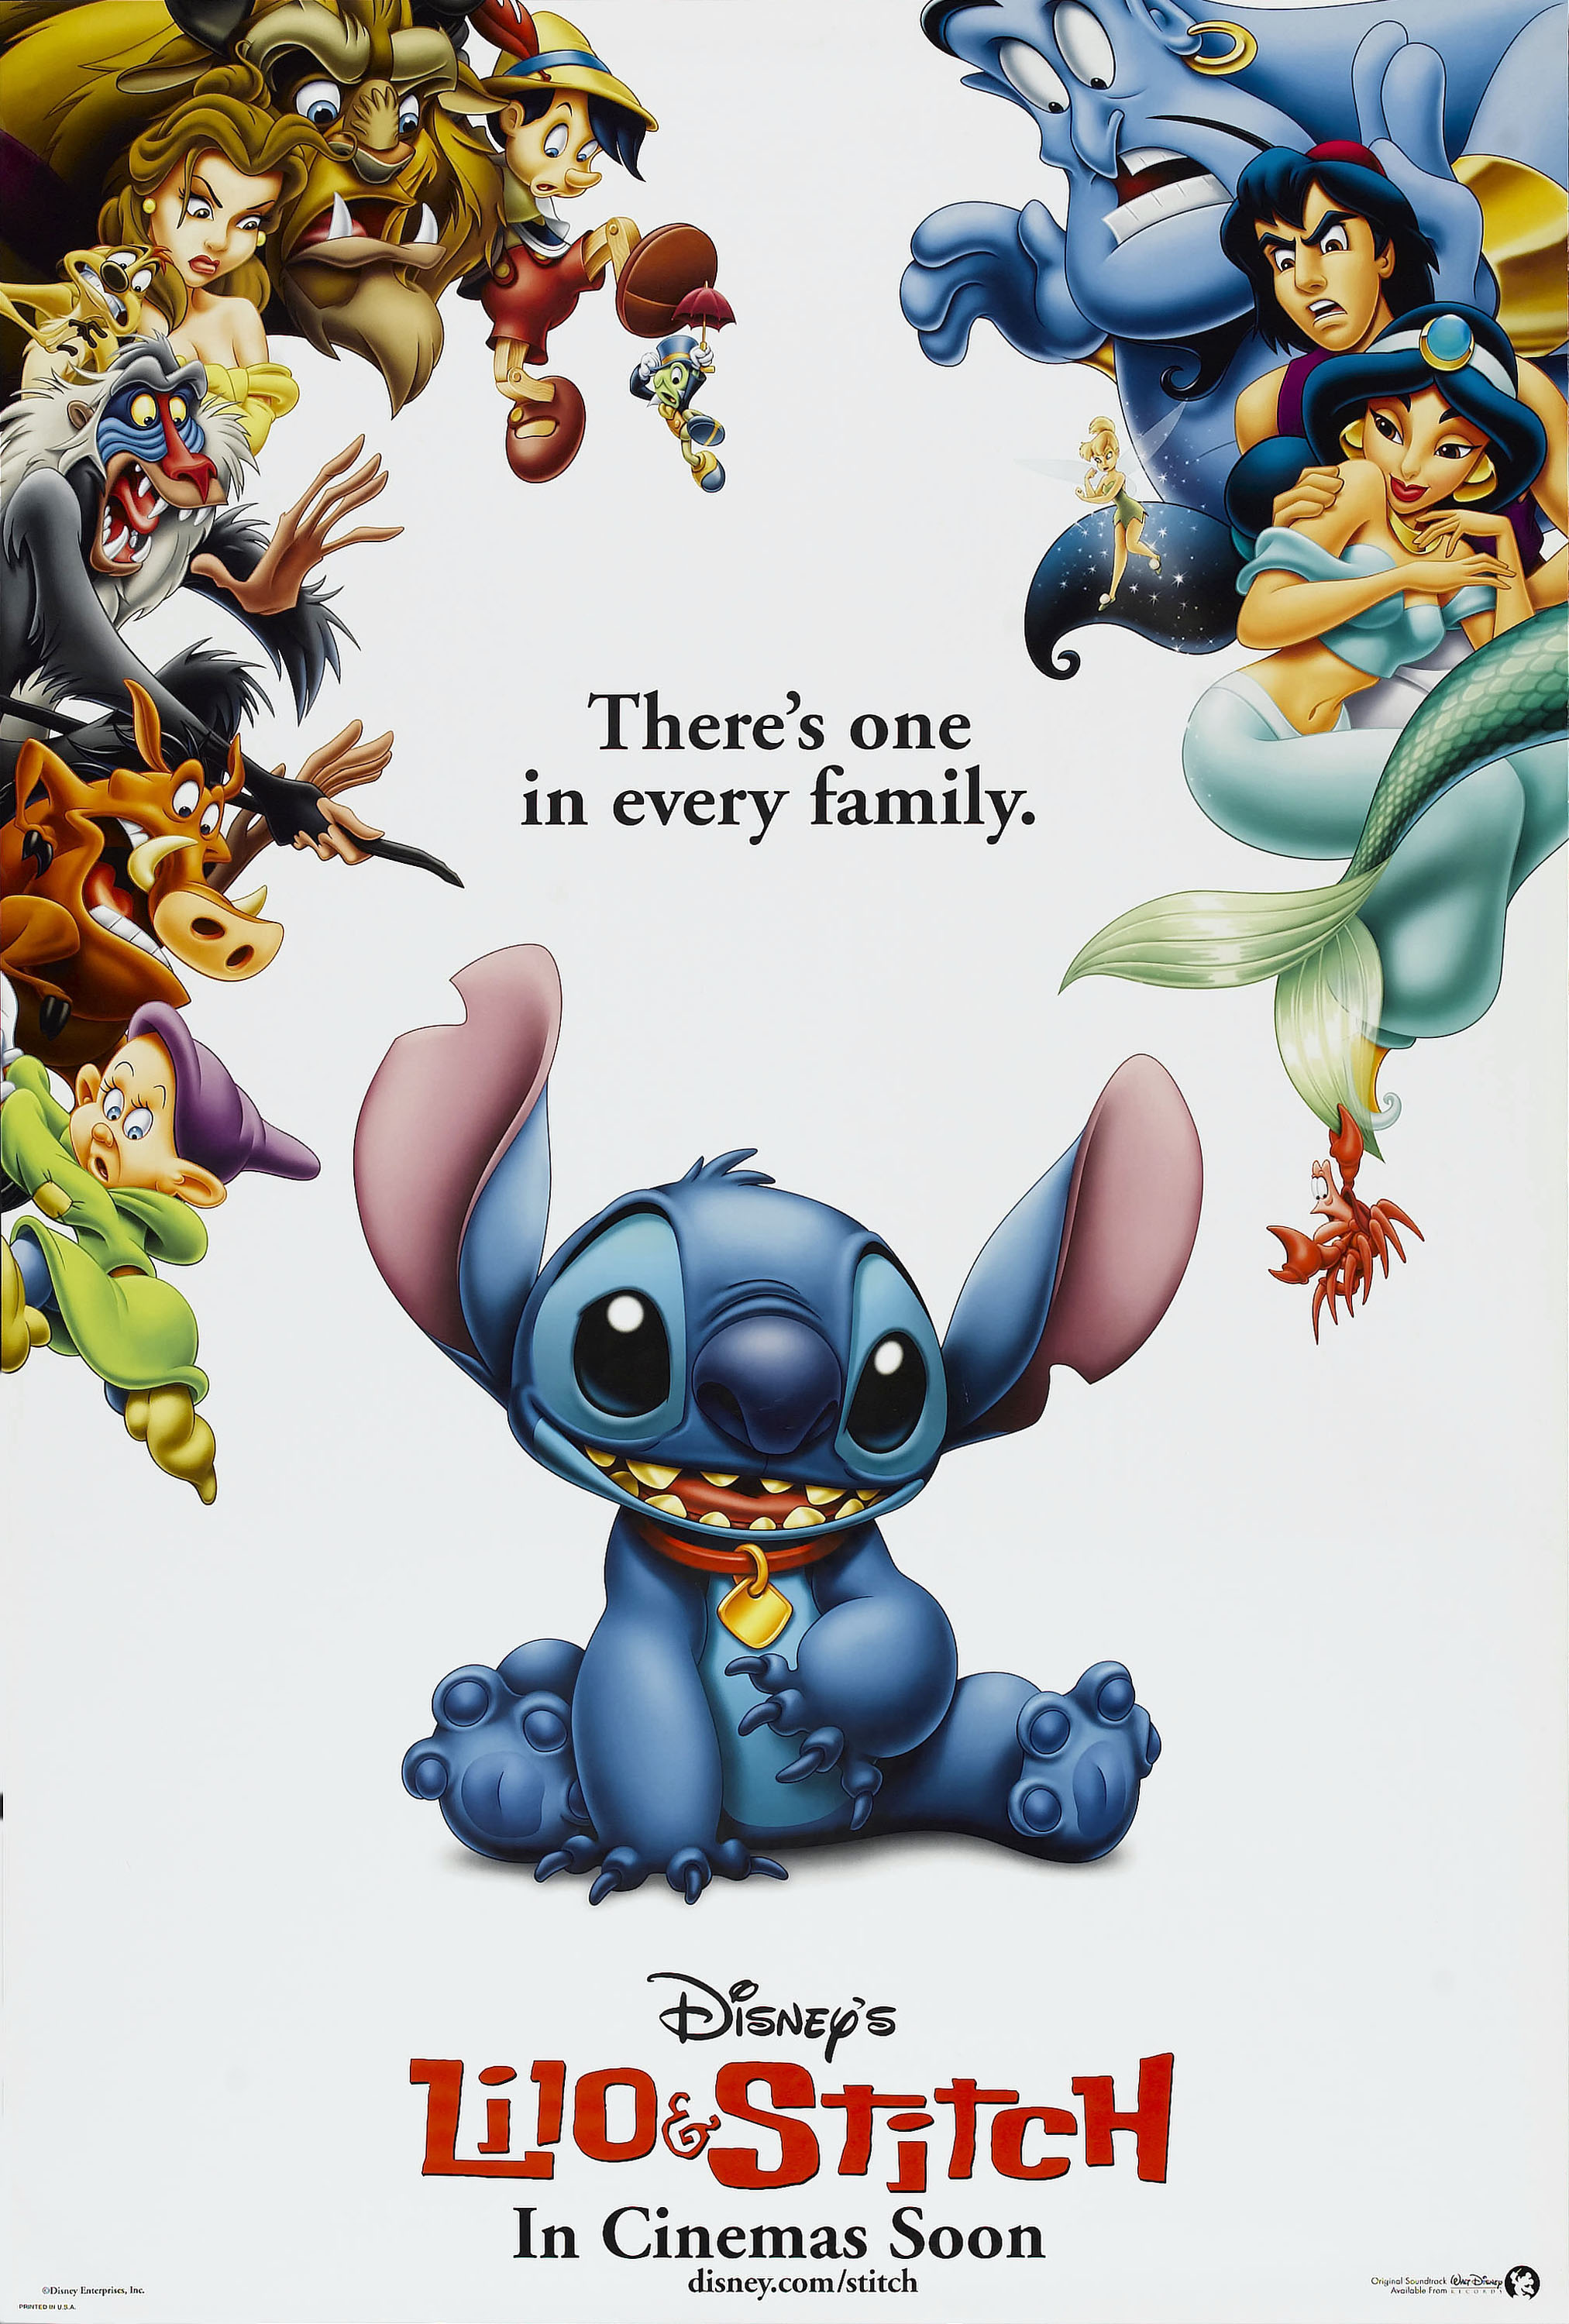 Lilo & Stitch: Trouble in Paradise PC Computer Video Game - Kids/Family